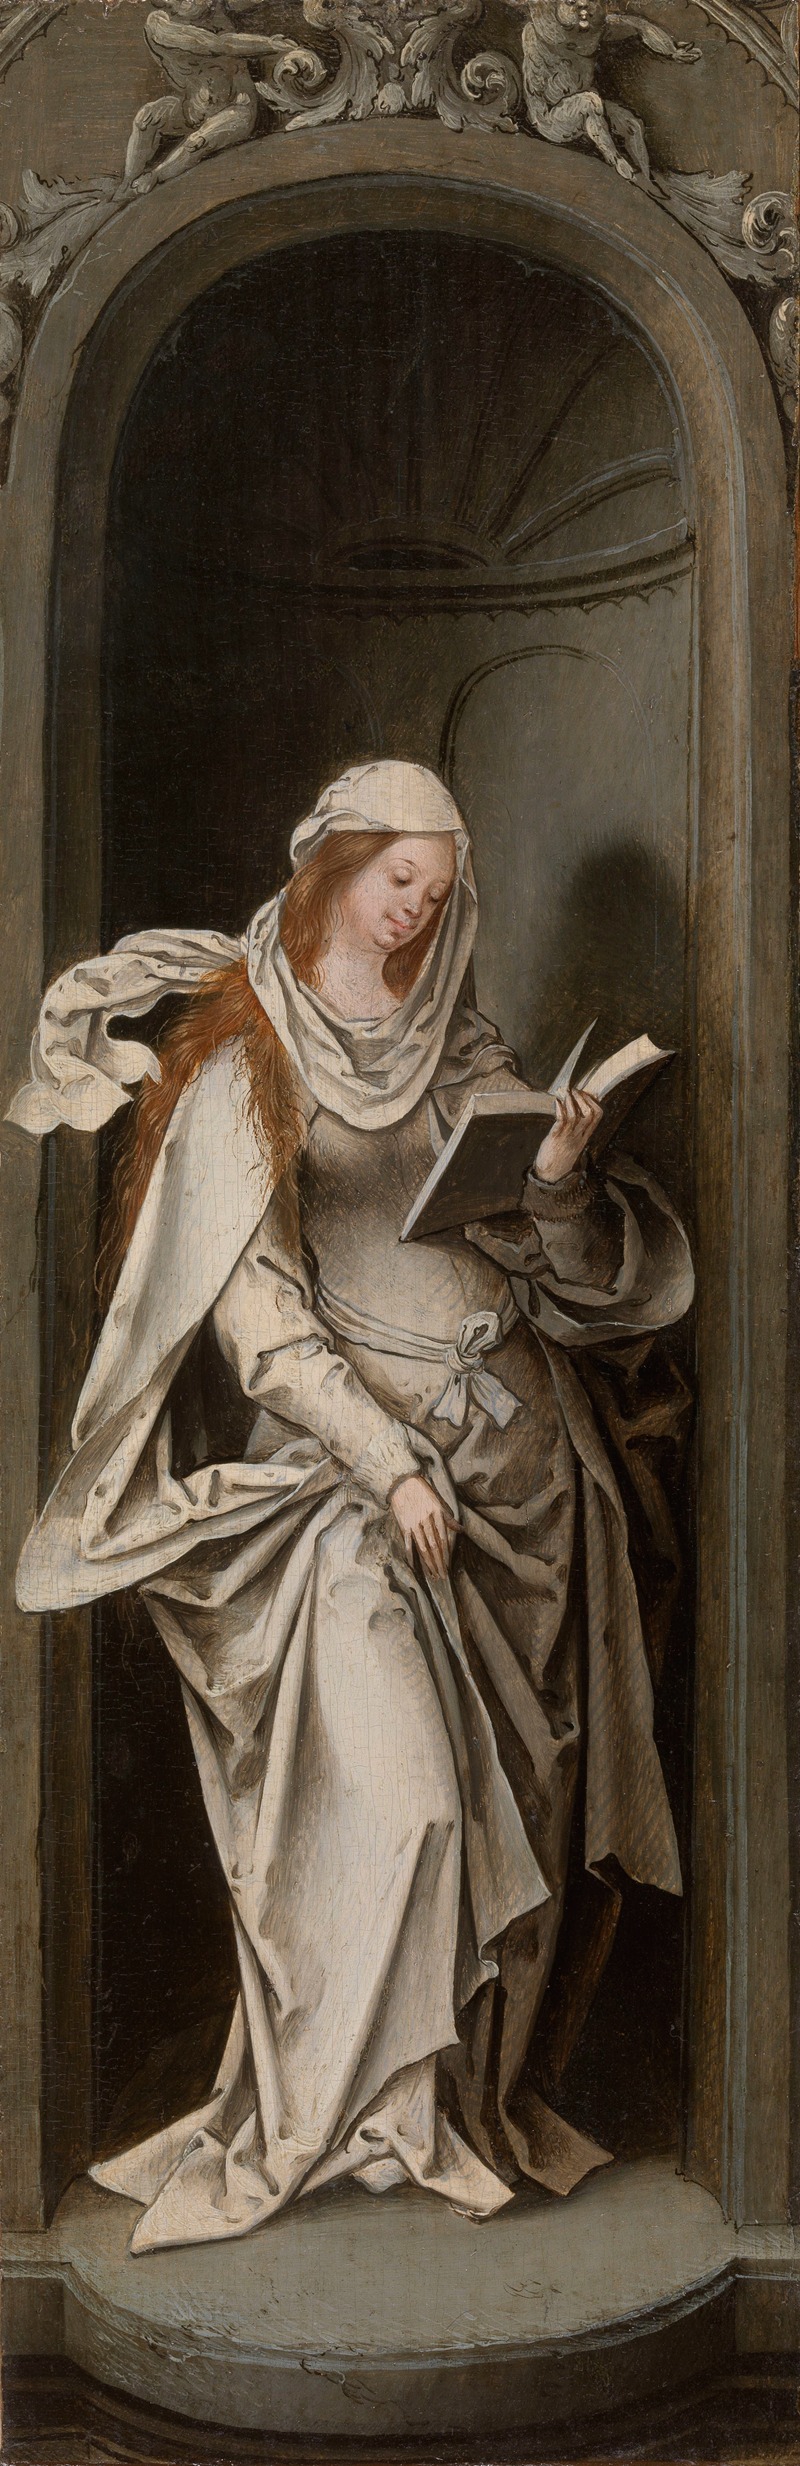 Master of the Antwerp Adoration - The Annunciation